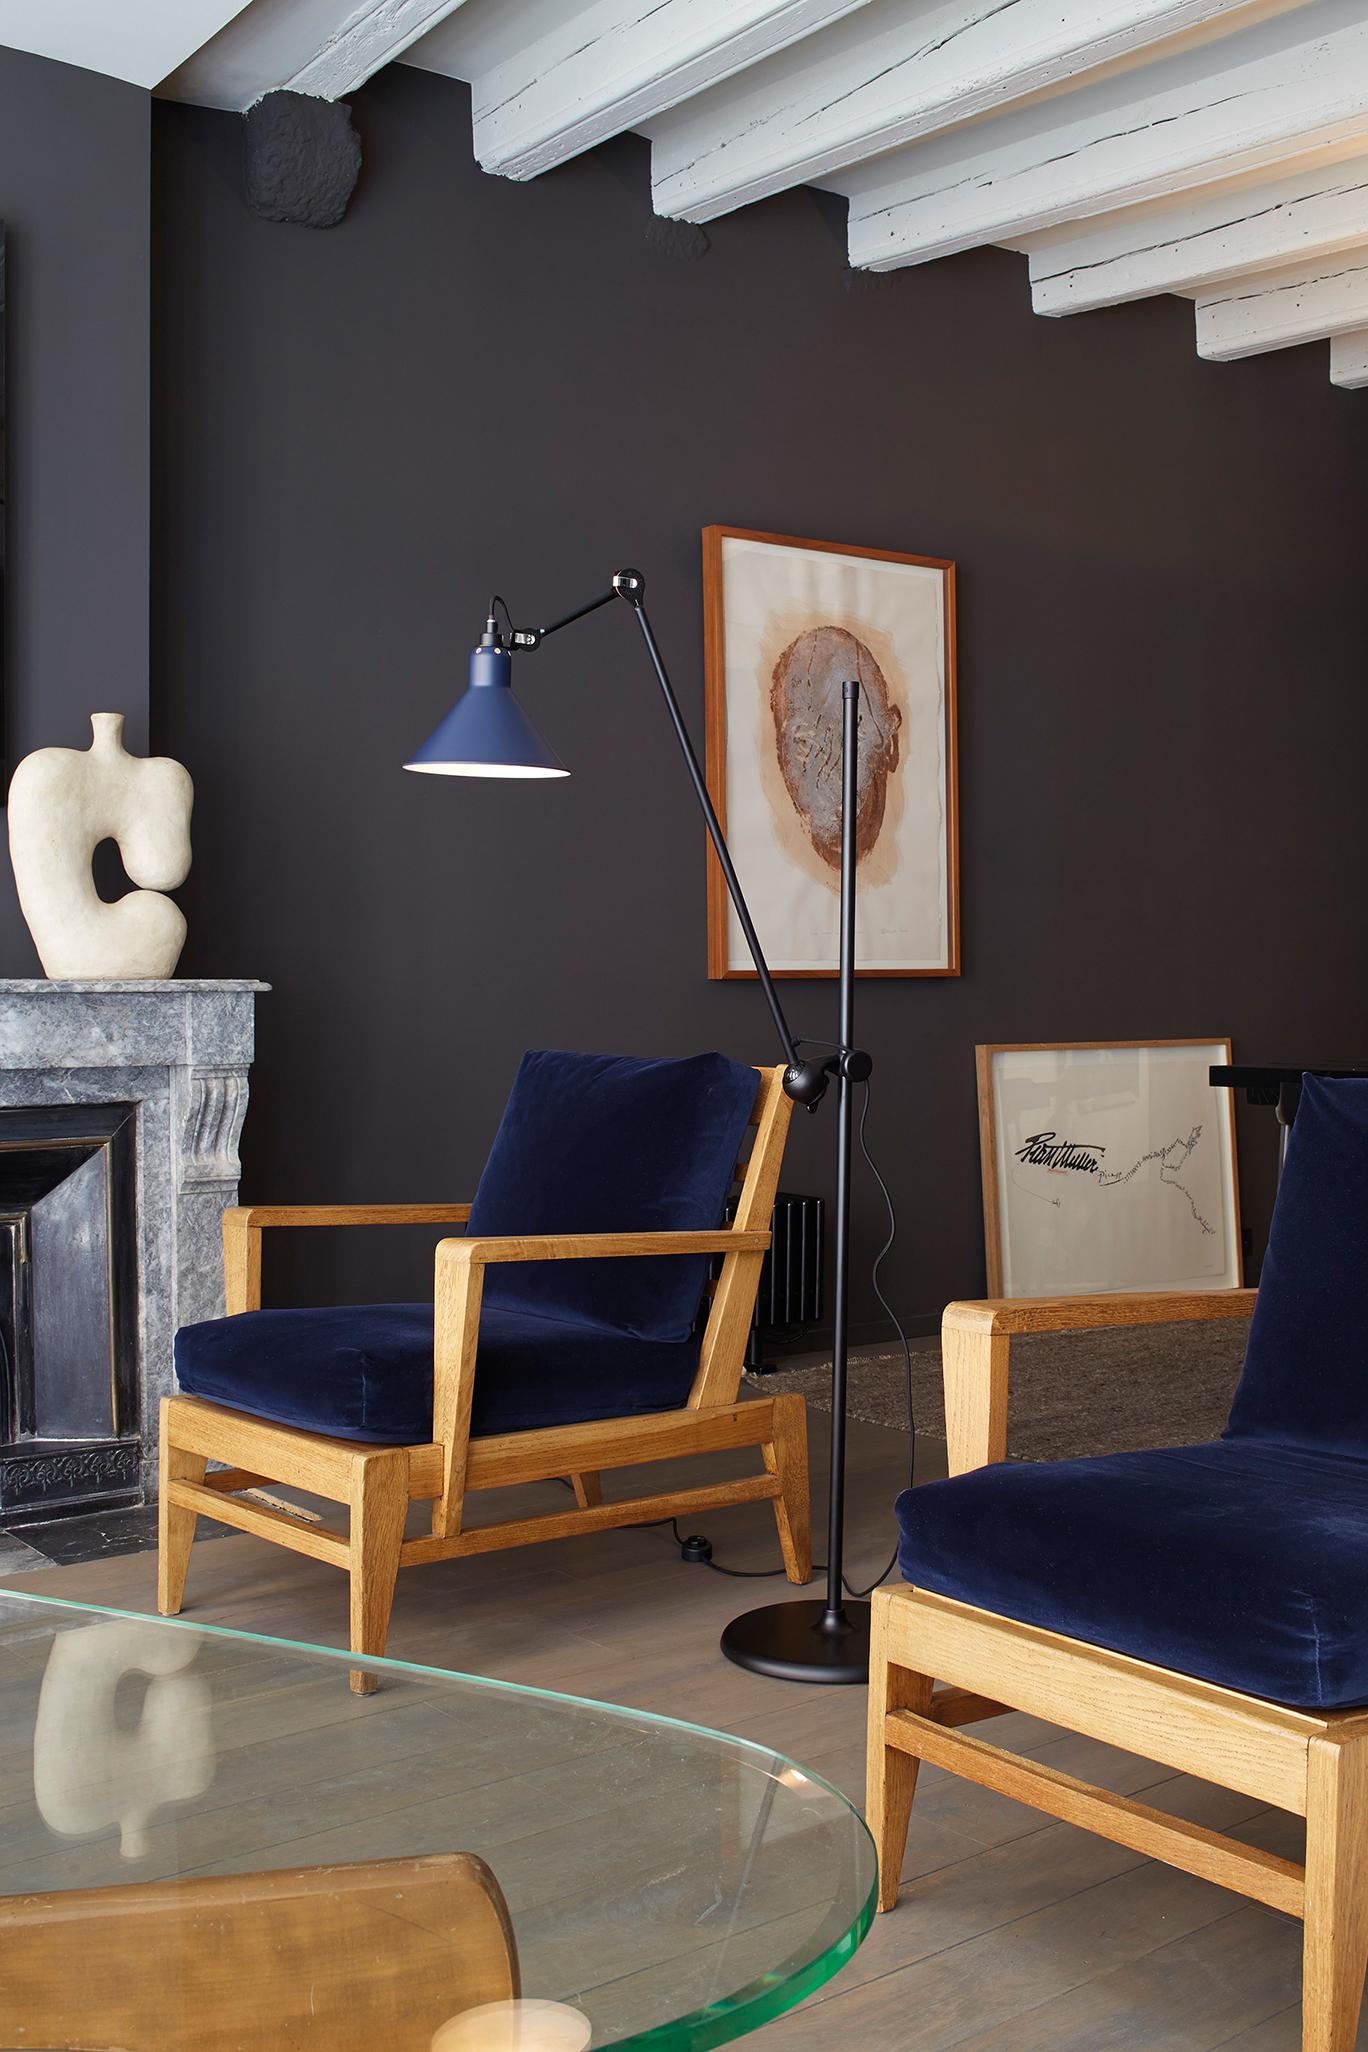 DCW Editions Lampe Gras N°215 Floor Lamp in Black Steel Arm and White Copper Shade by Bernard-Albin Gras
 
 In 1921 Bernard-Albin GRAS designed a series of lamps for use in offices and in industrial environments. The GRAS lamp, as it was